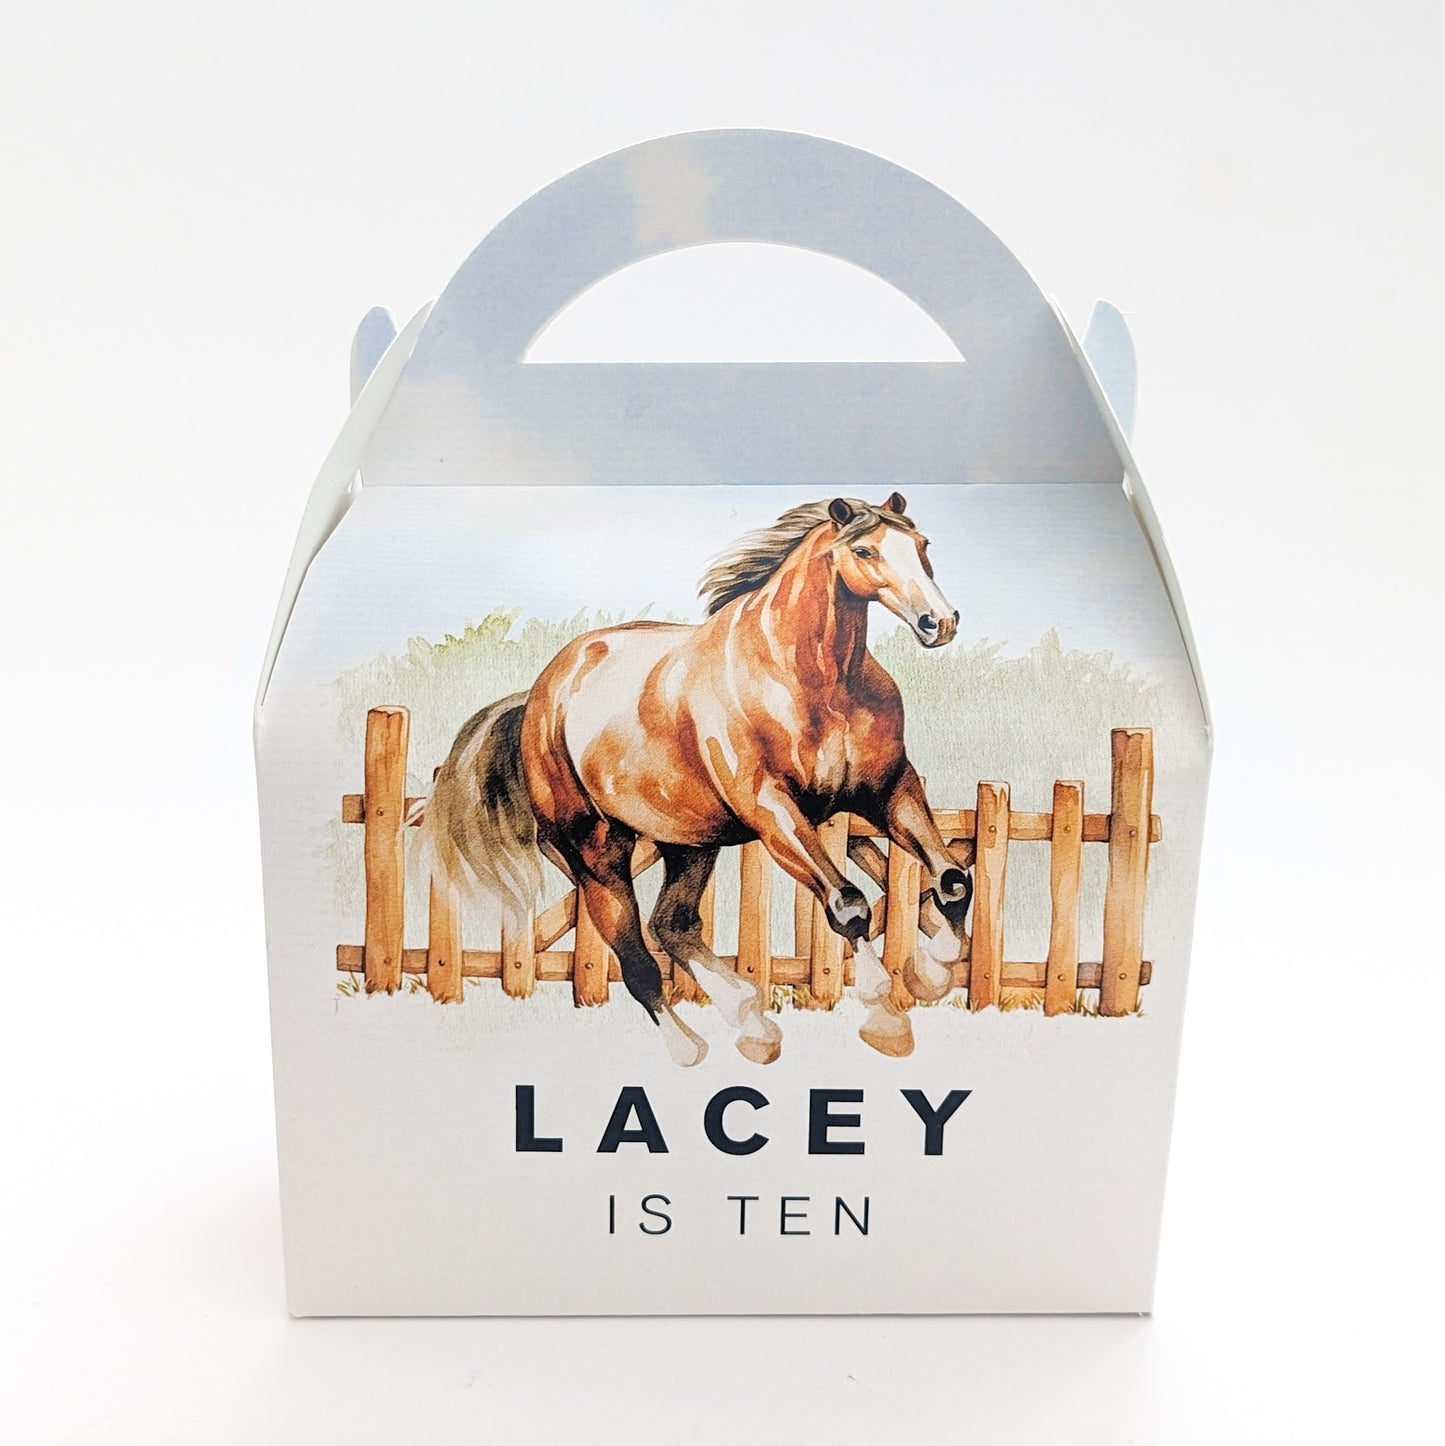 HORSES Equestrian Horse Riding Personalised Children’s Party Box Gift Bag Favour